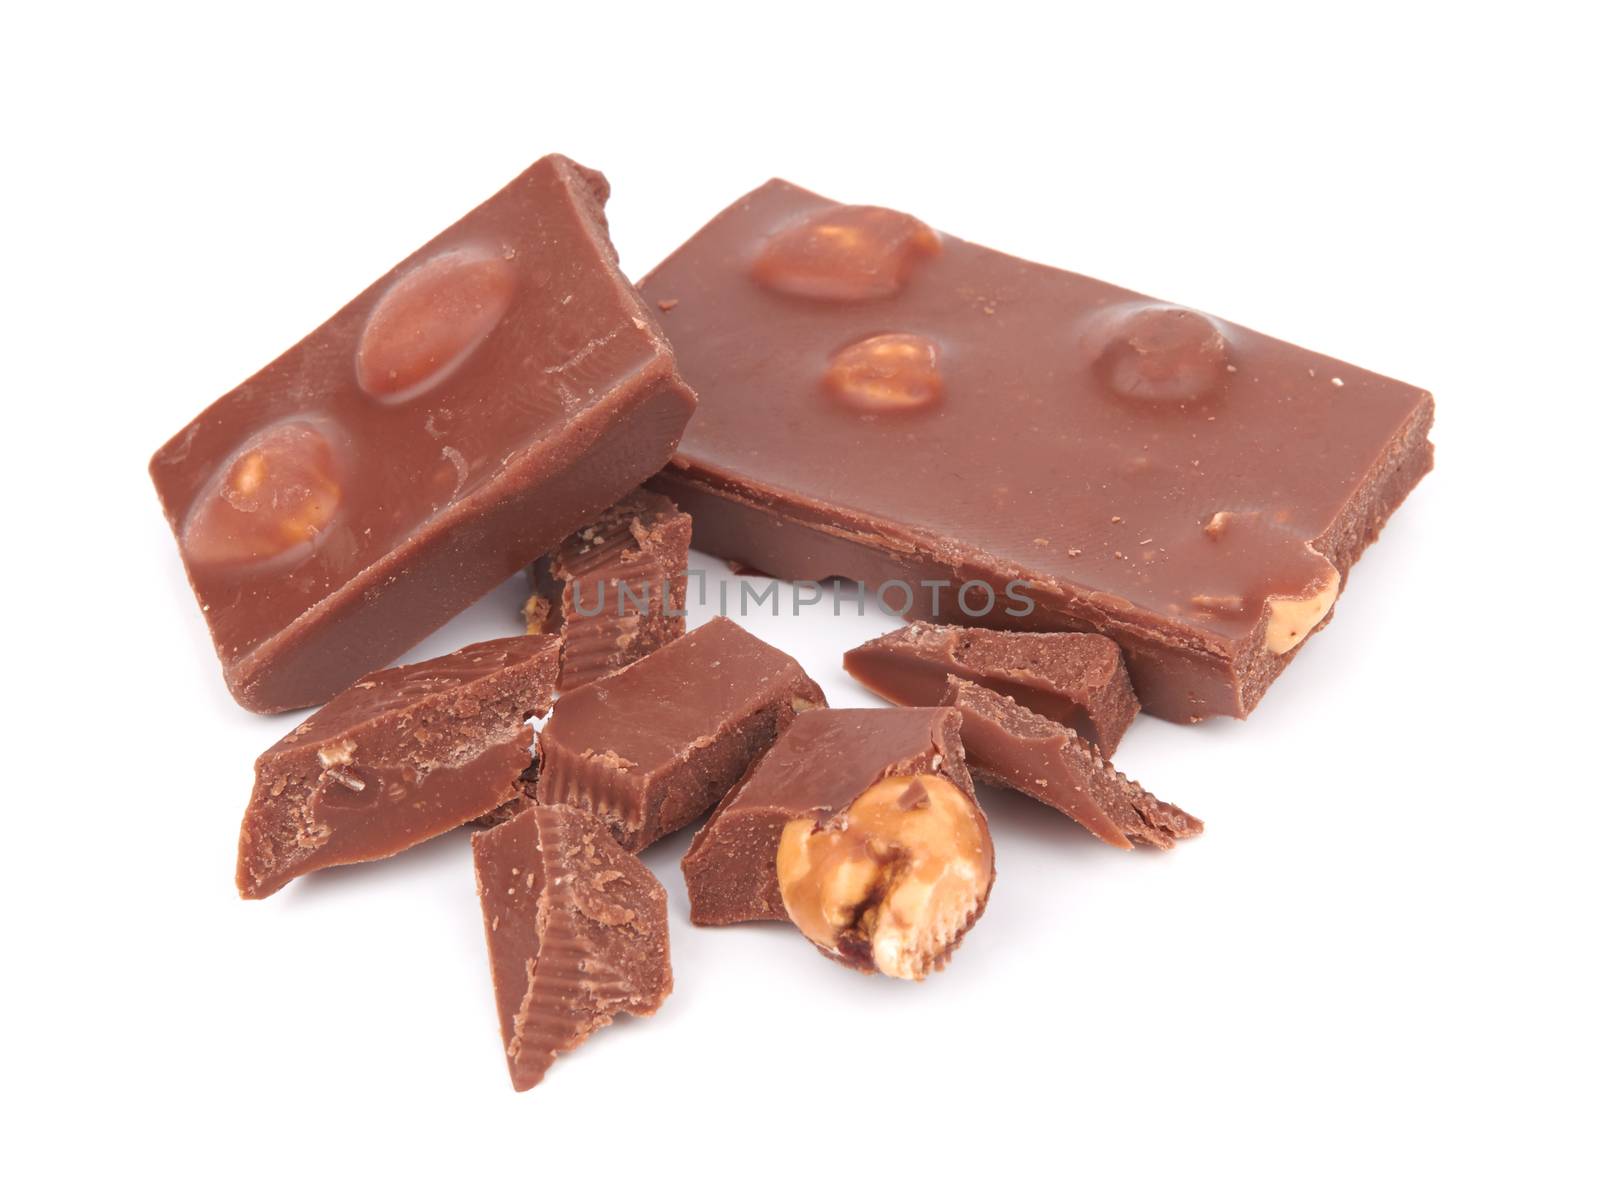 Broken chocolate bar isolated on a white background 